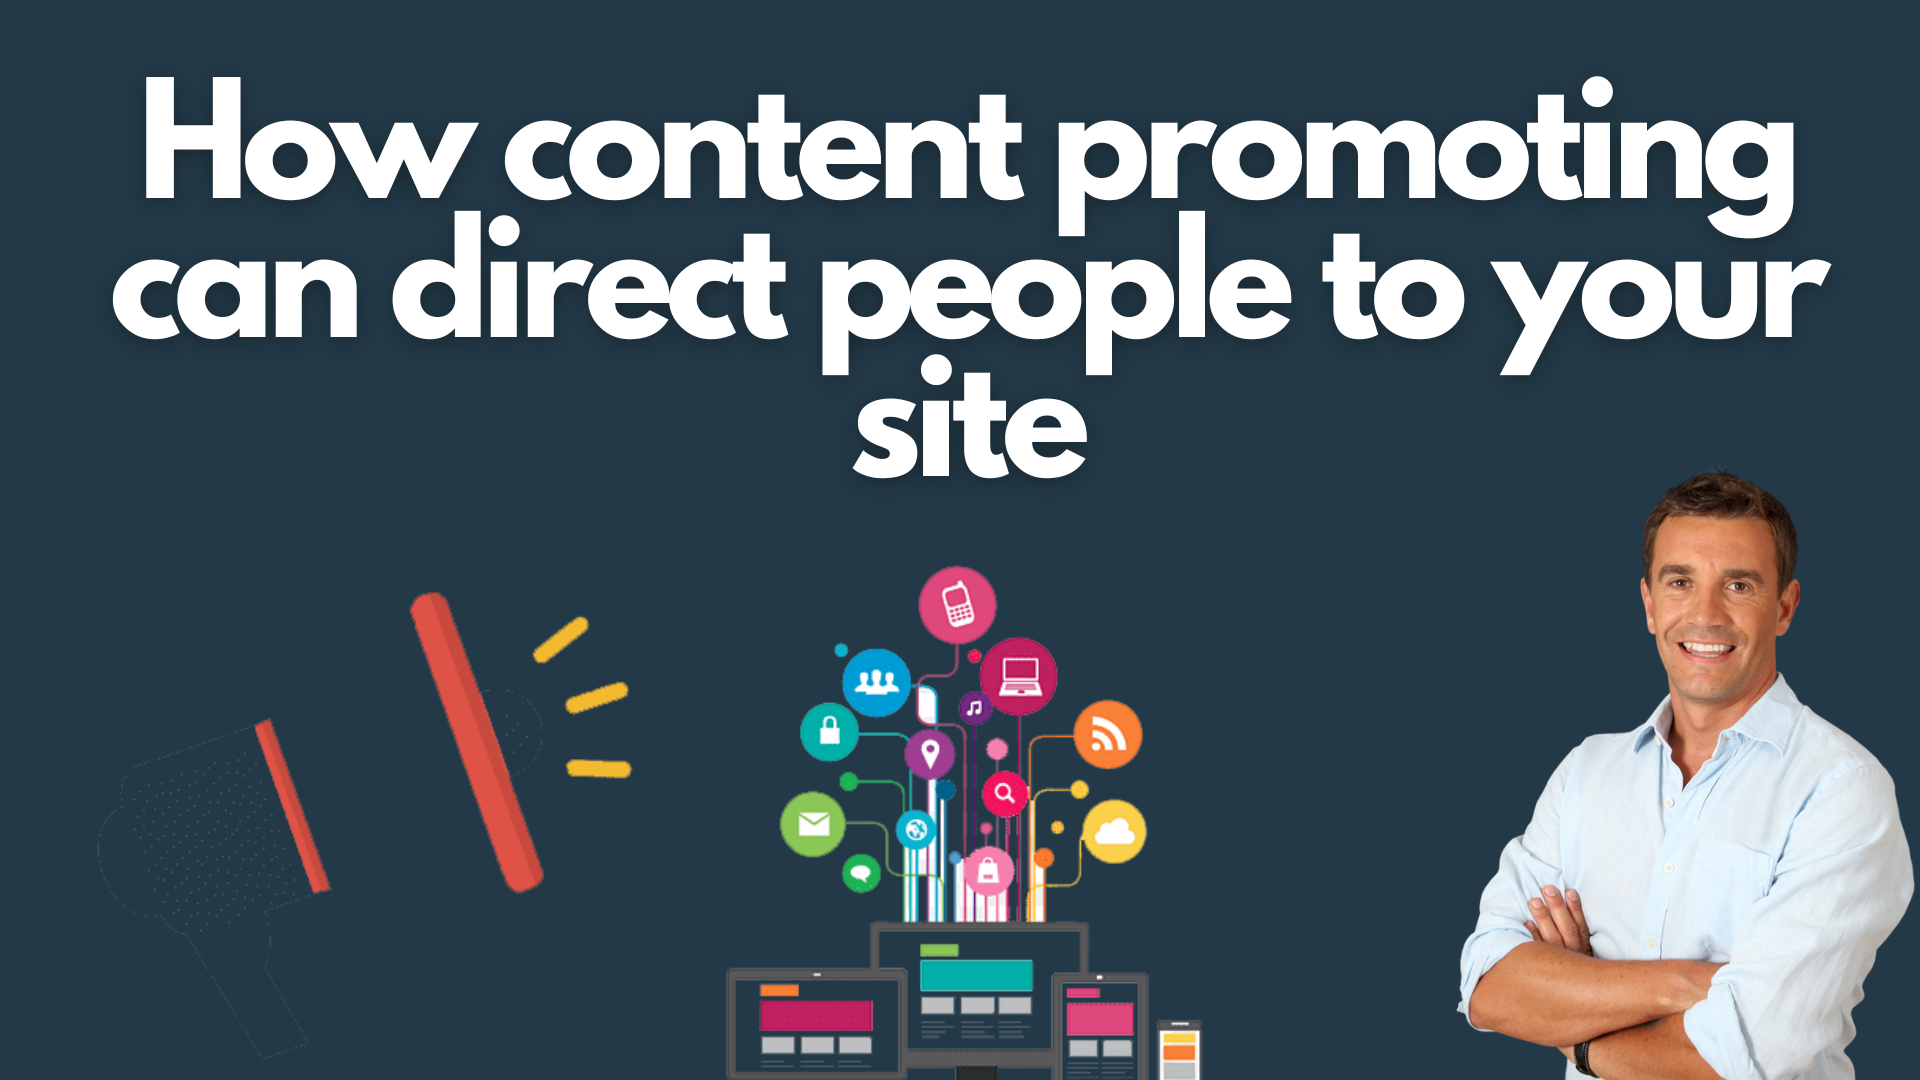 How content promoting can direct people to your site